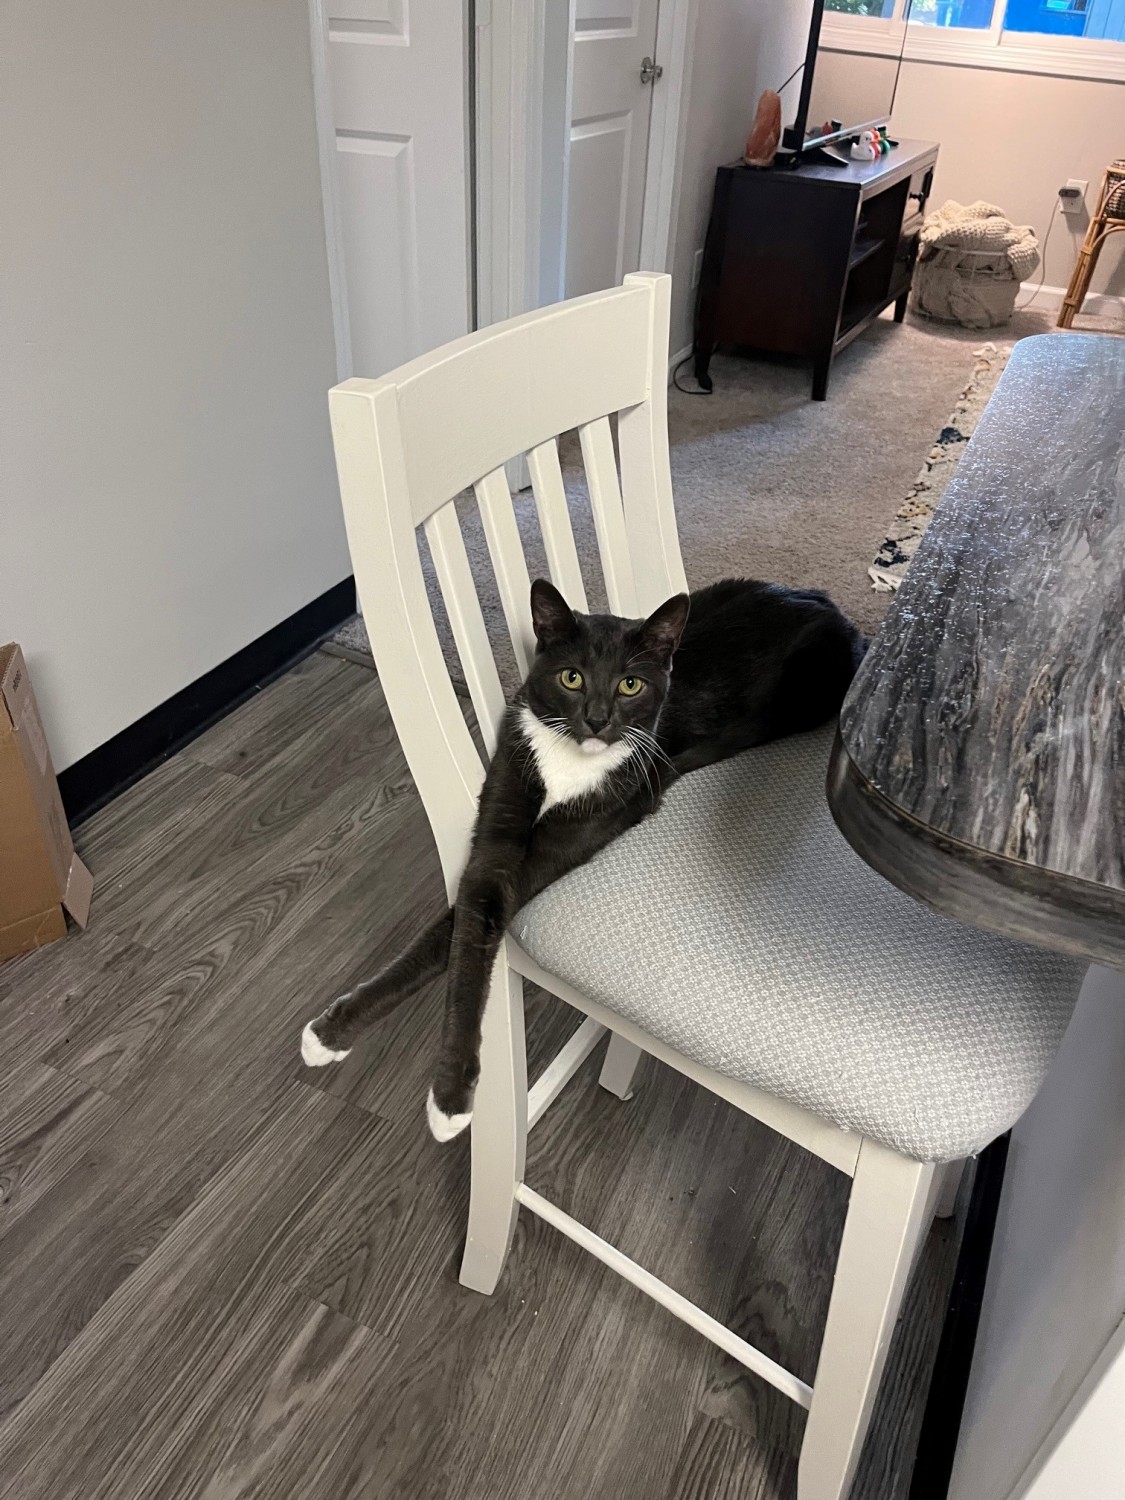 Black and white cat sitting on chair with arms crossed